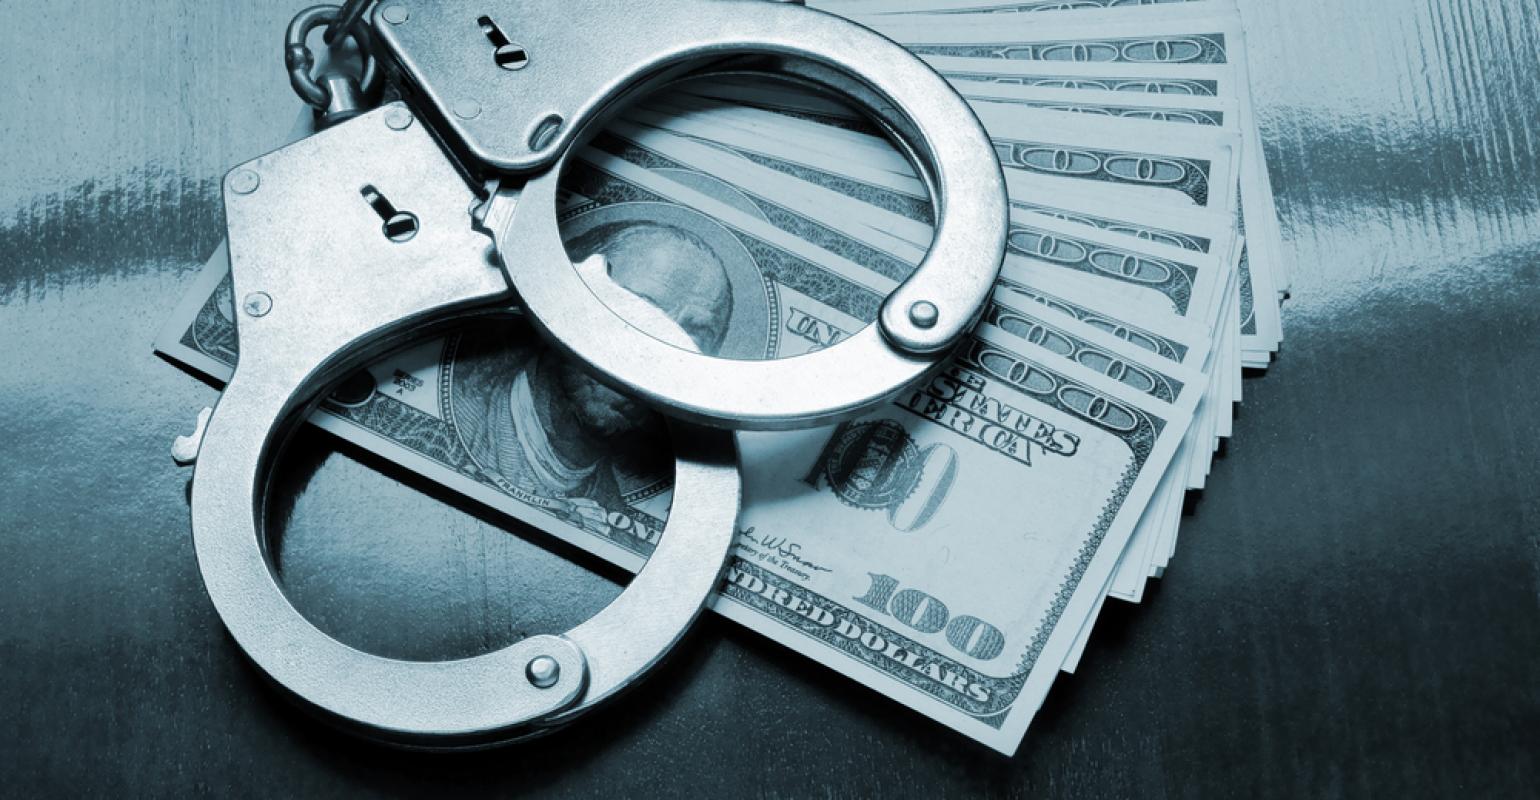 Money laundering in real estate needs more federal attention observer